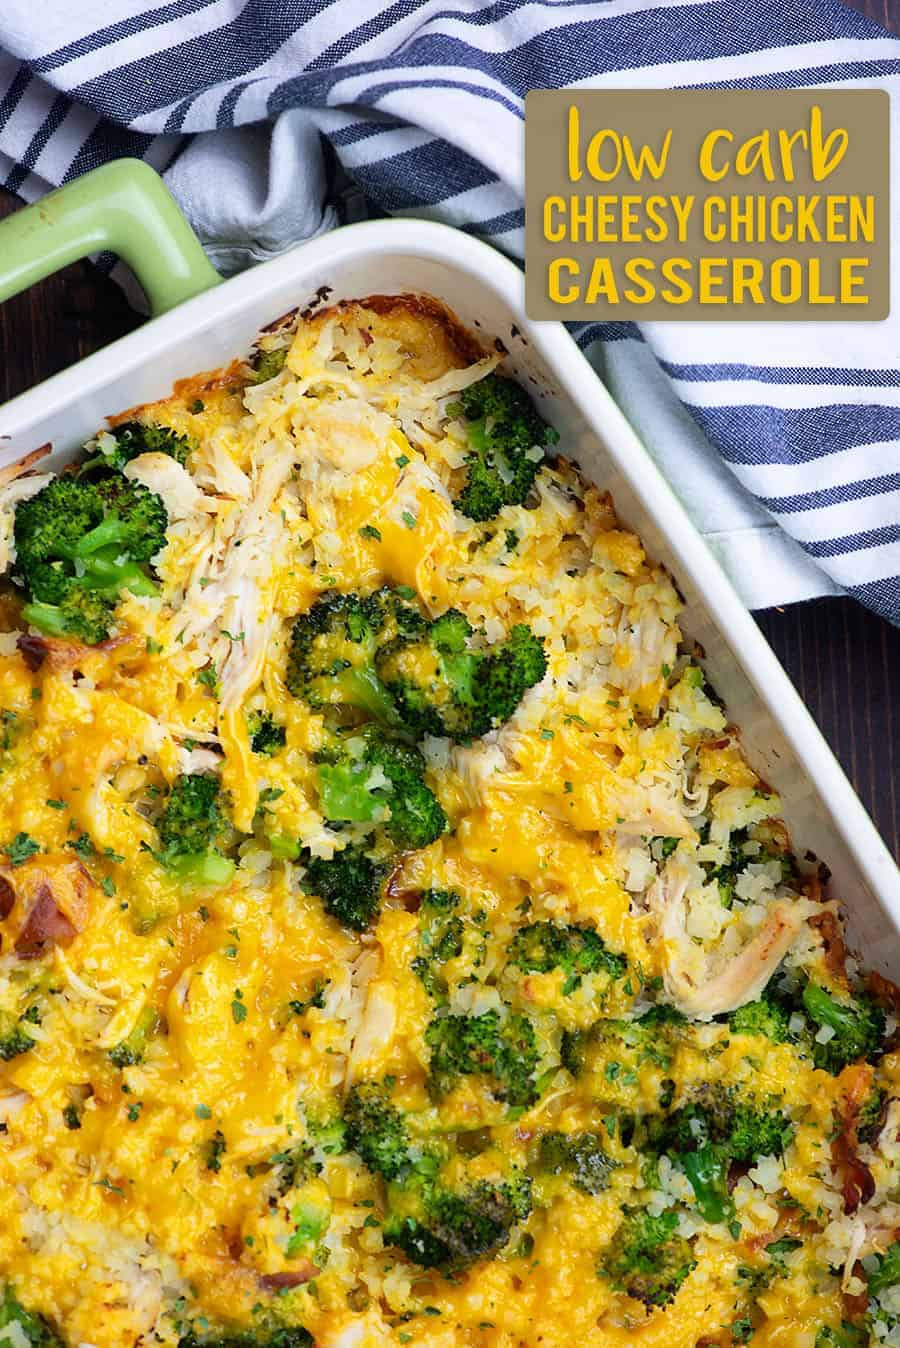 Healthy Chicken Casserole Low Carb
 Low Carb Chicken Casserole